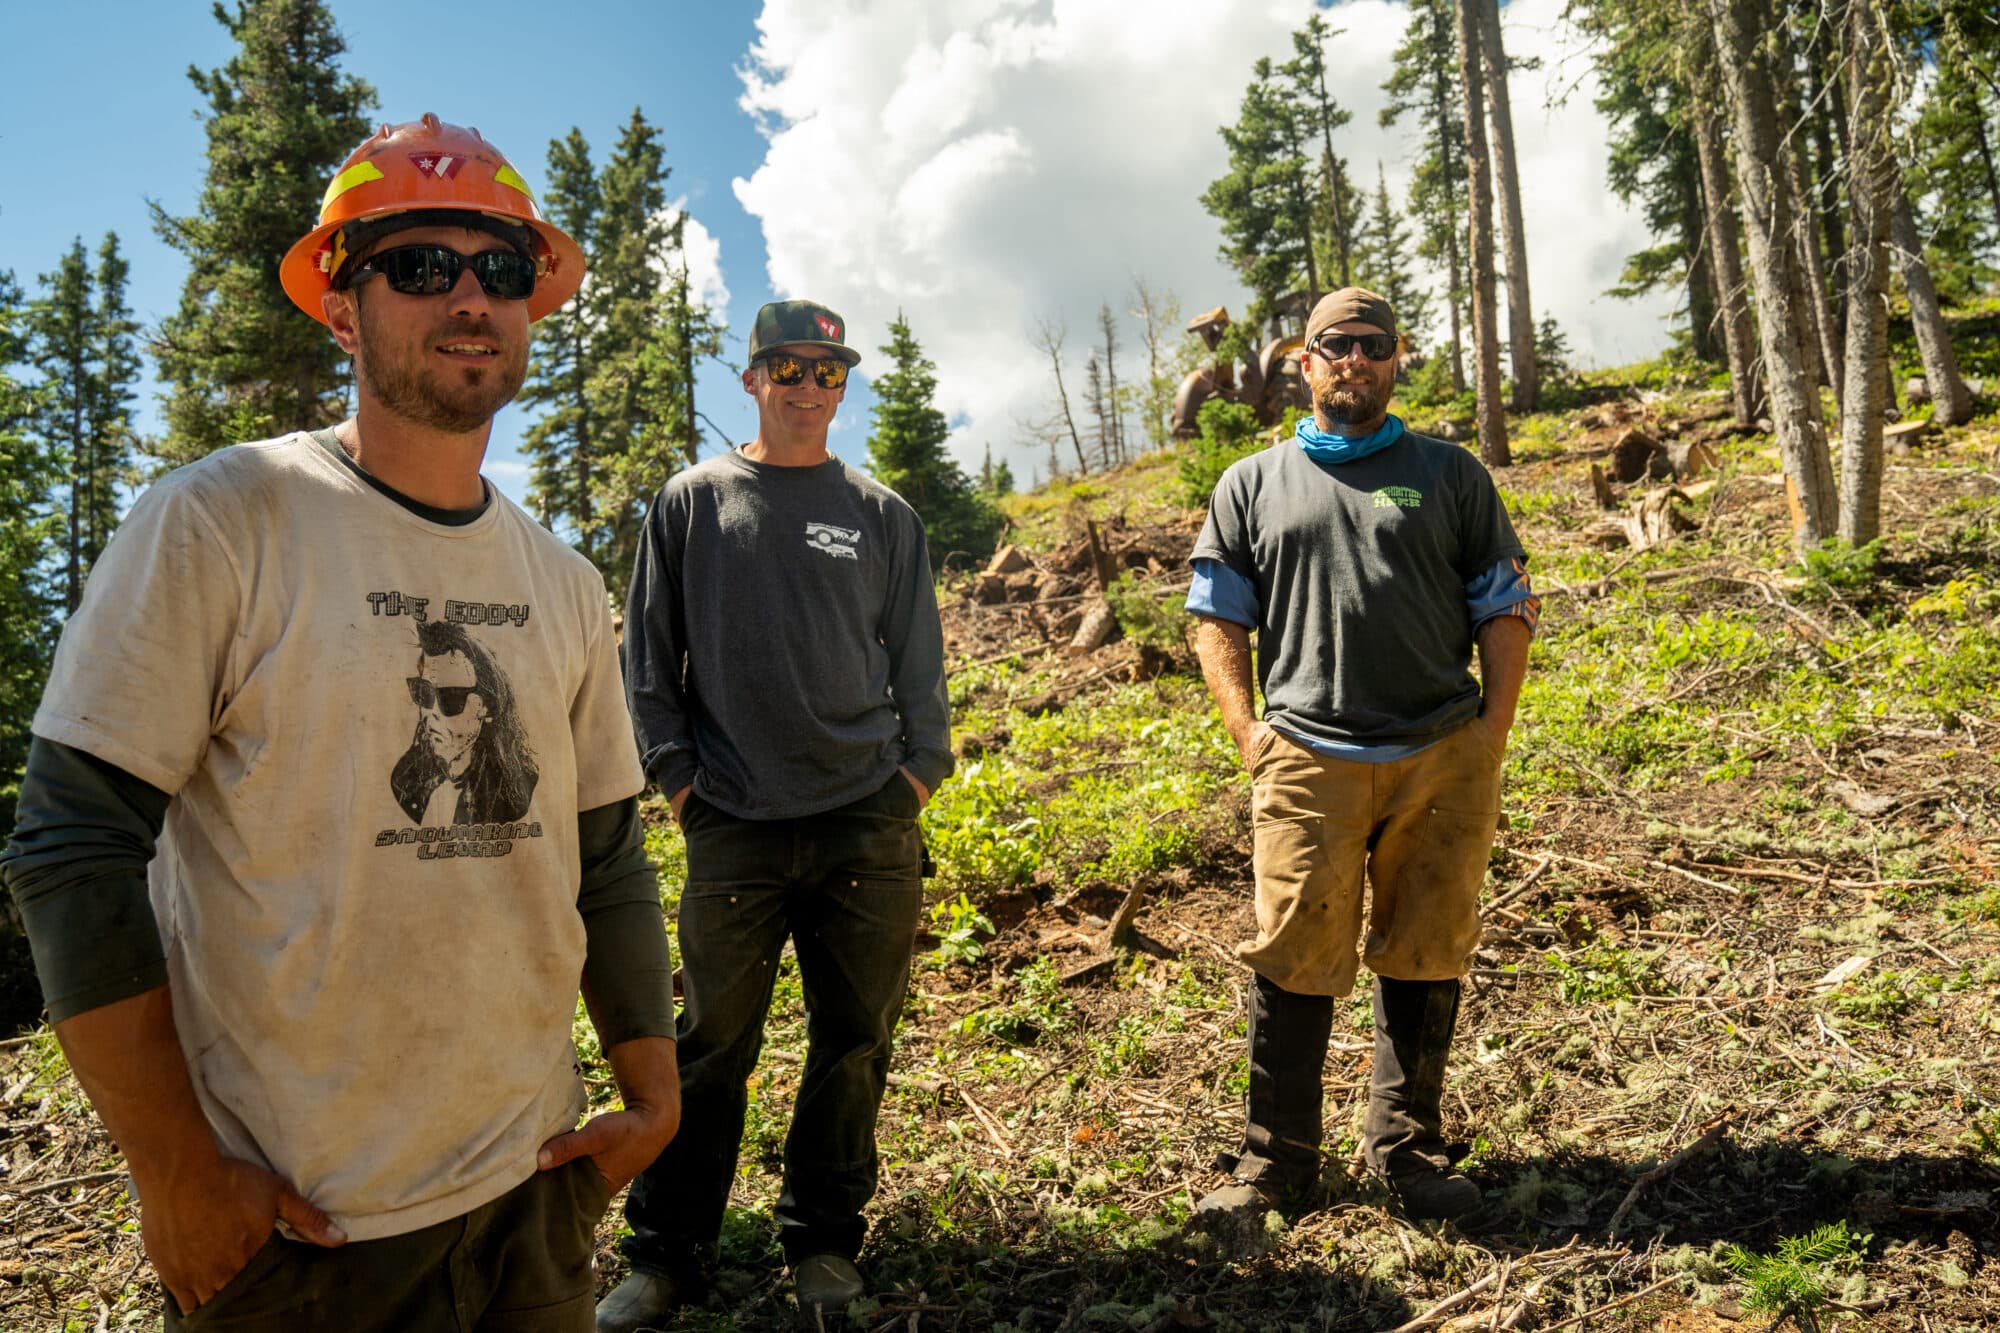 Slopes manager and team pose for a photo during hazardous tree removal and fire mitigation project